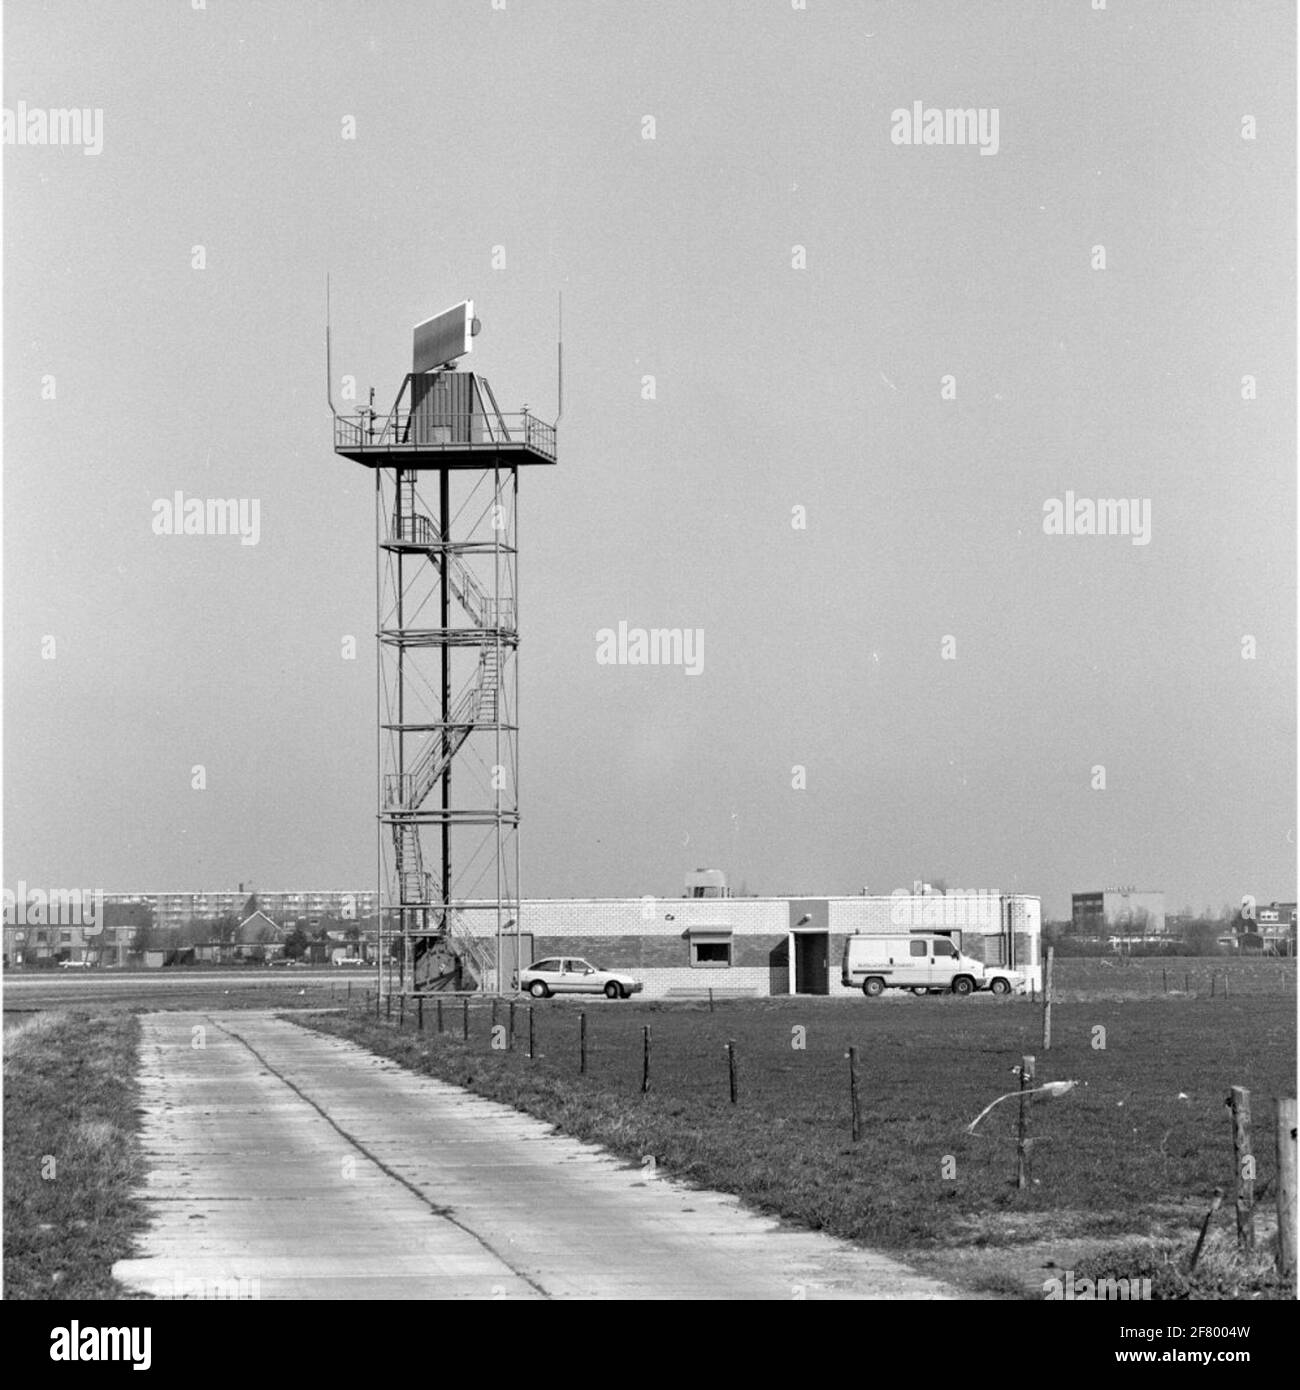 The SSR (Secundary Surveillance Radar) at the MarineLiegkamp de Kooy in March 1990. Stock Photo